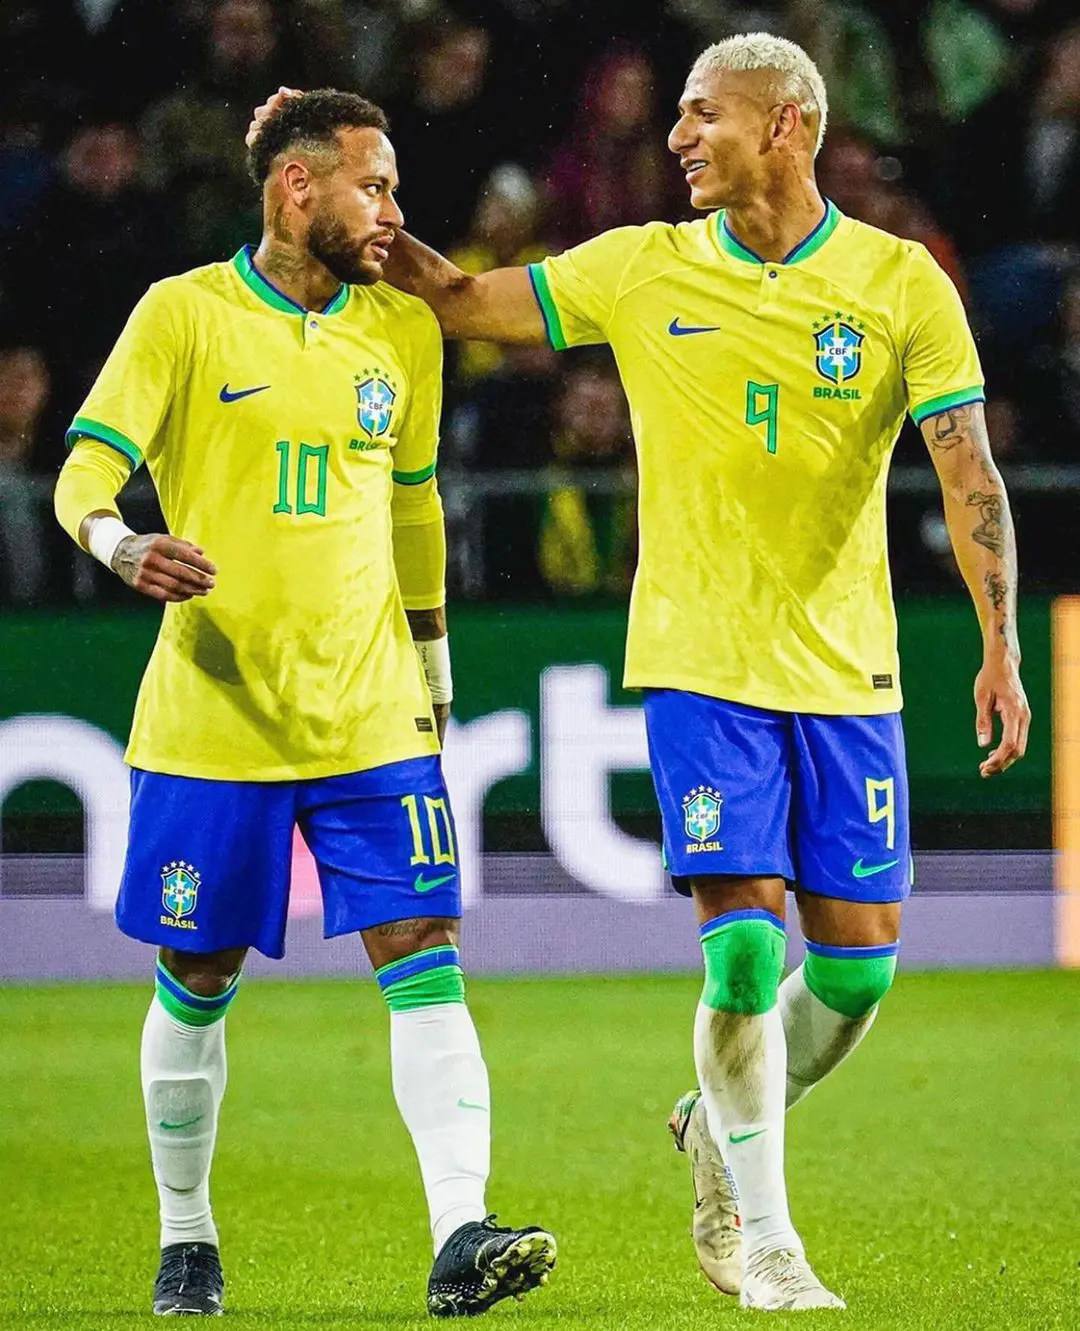 Neymar and Richarlison are quite close to each other. Neymar has been Richarlison's childhood idol.